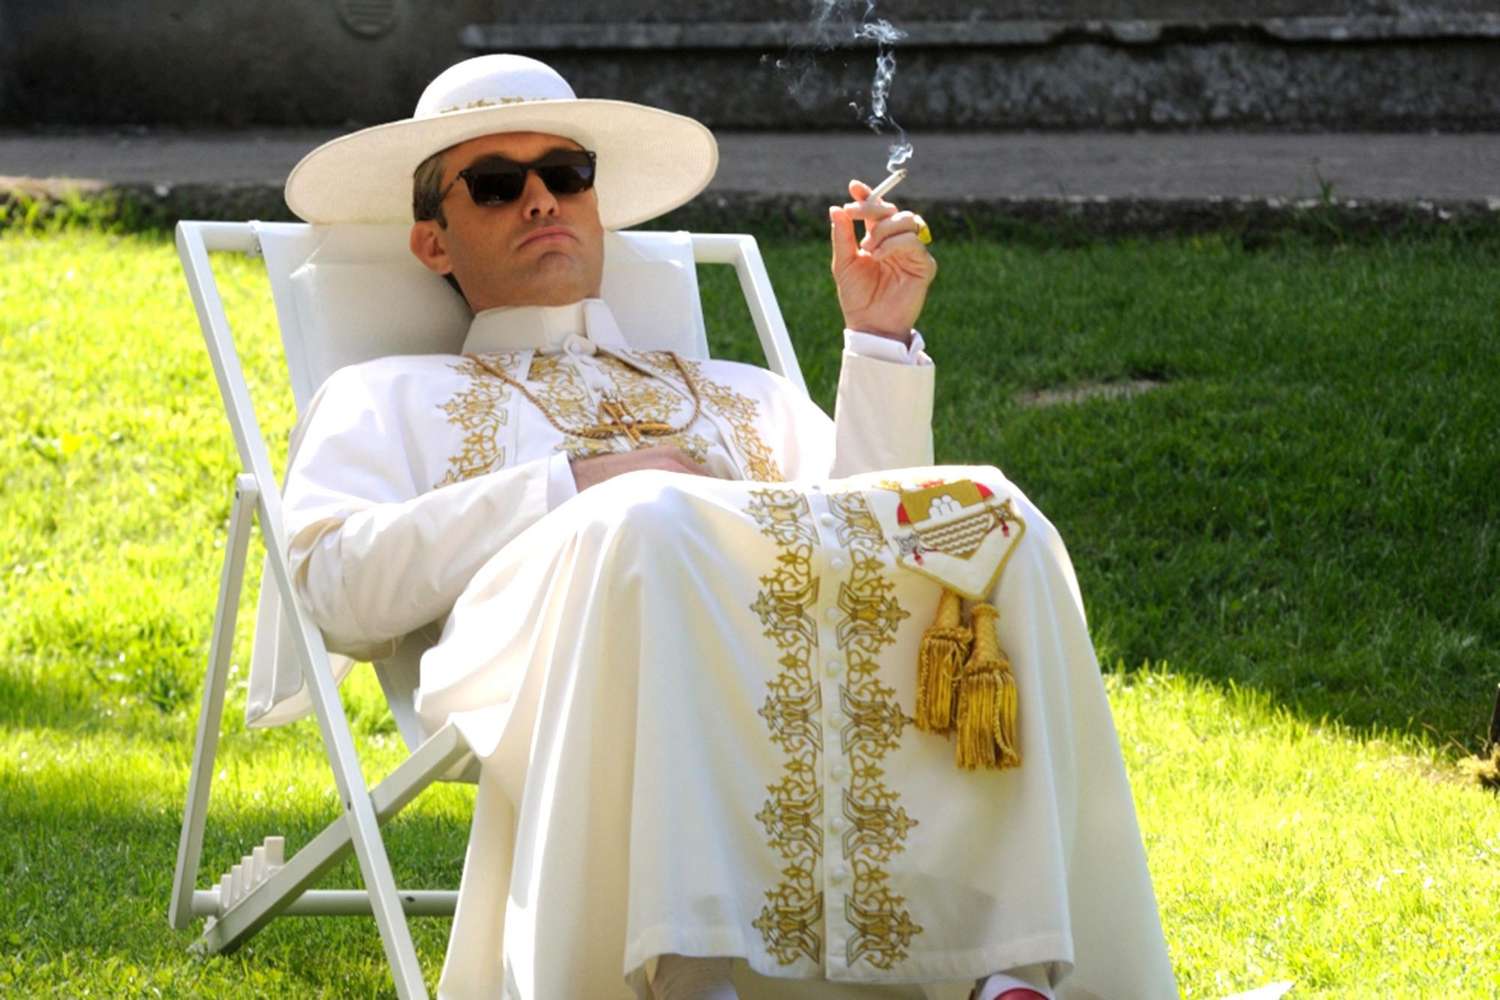 The young pope,&nbsp;The Young Pope